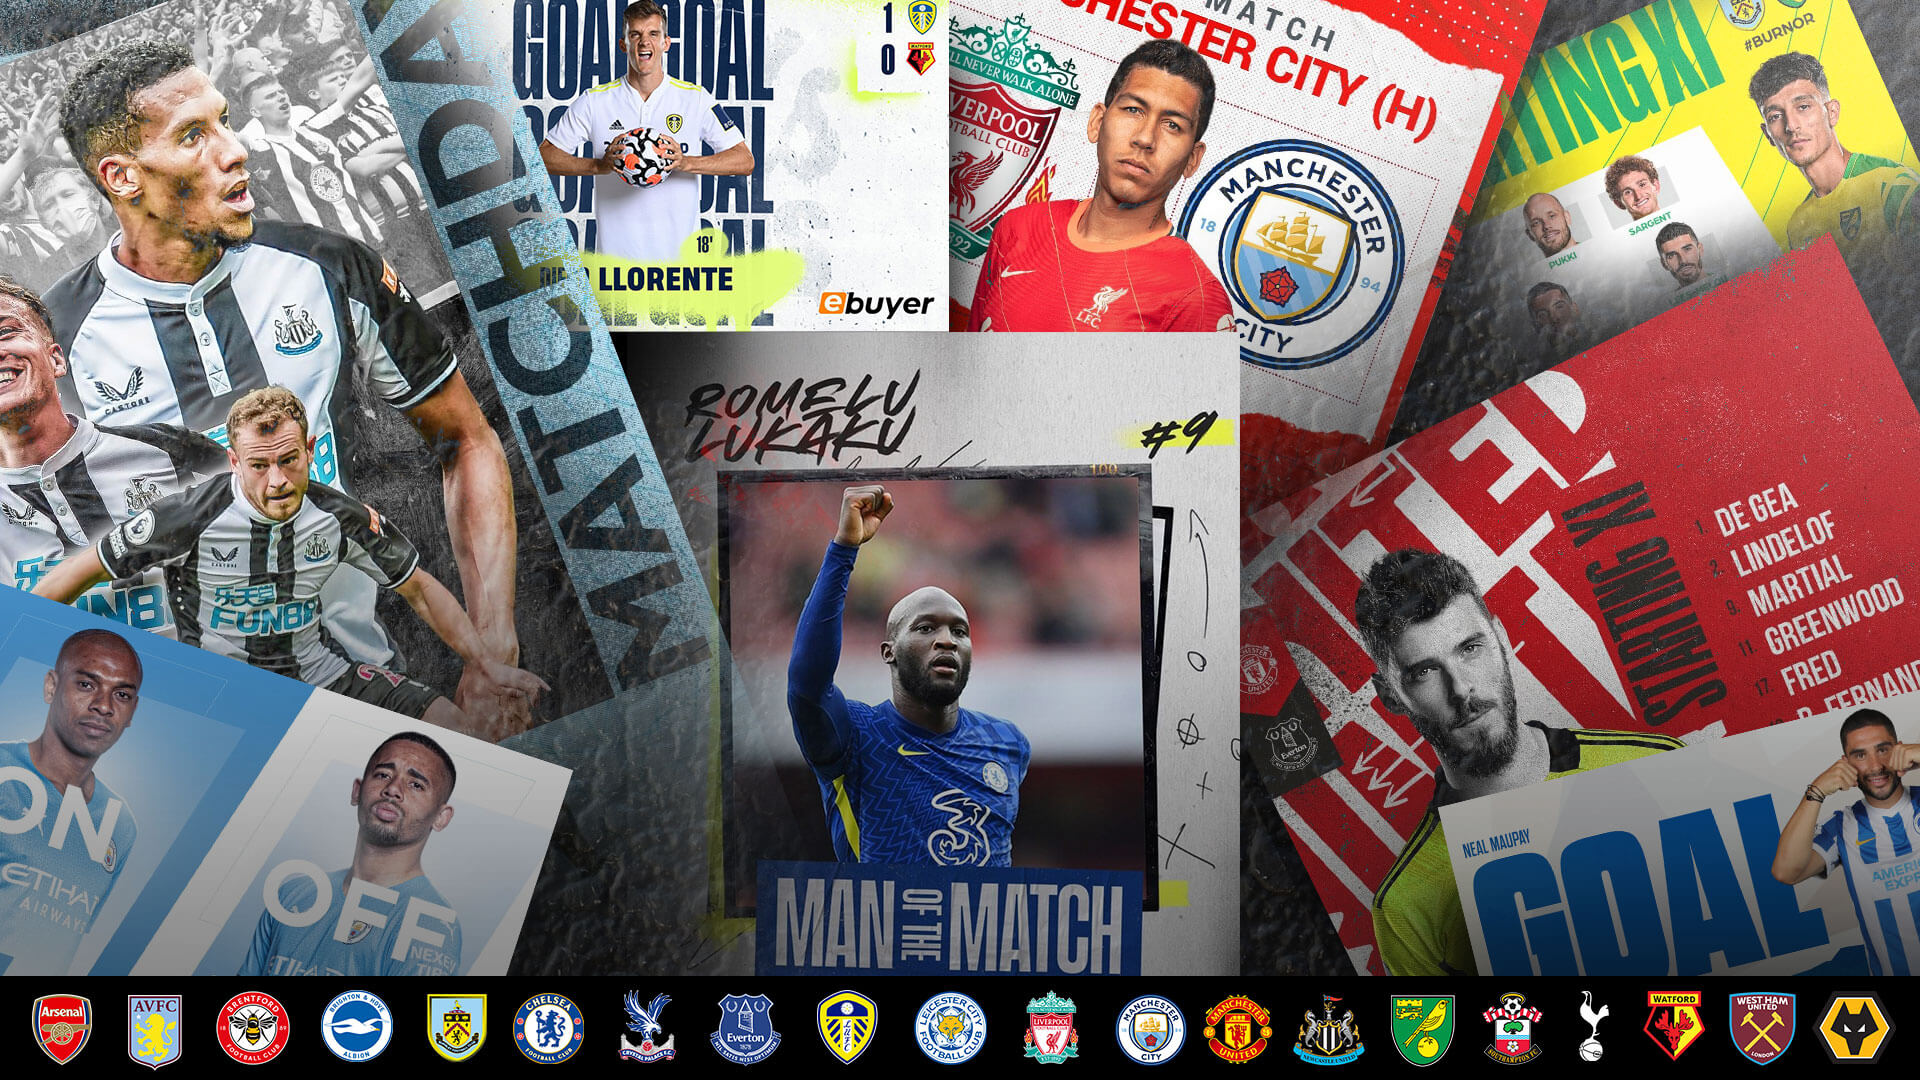 The Premier League teams and their Matchday Graphics. Who is the king of visuals?